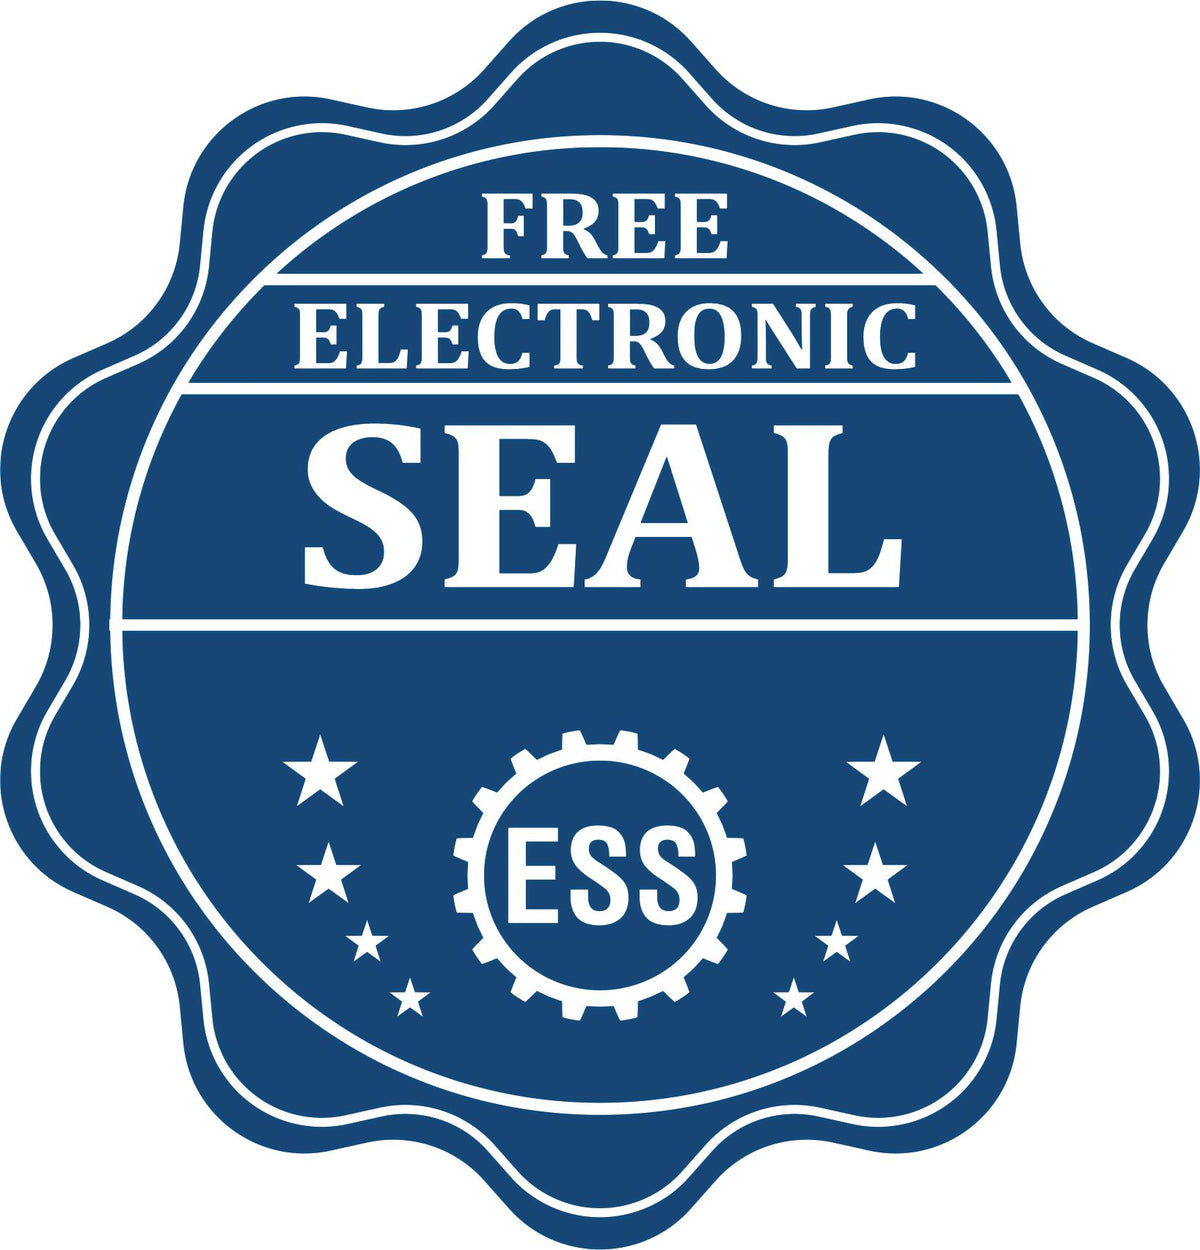 A badge showing a free electronic seal for the Gift North Dakota Geologist Seal with stars and the ESS gear on the emblem.